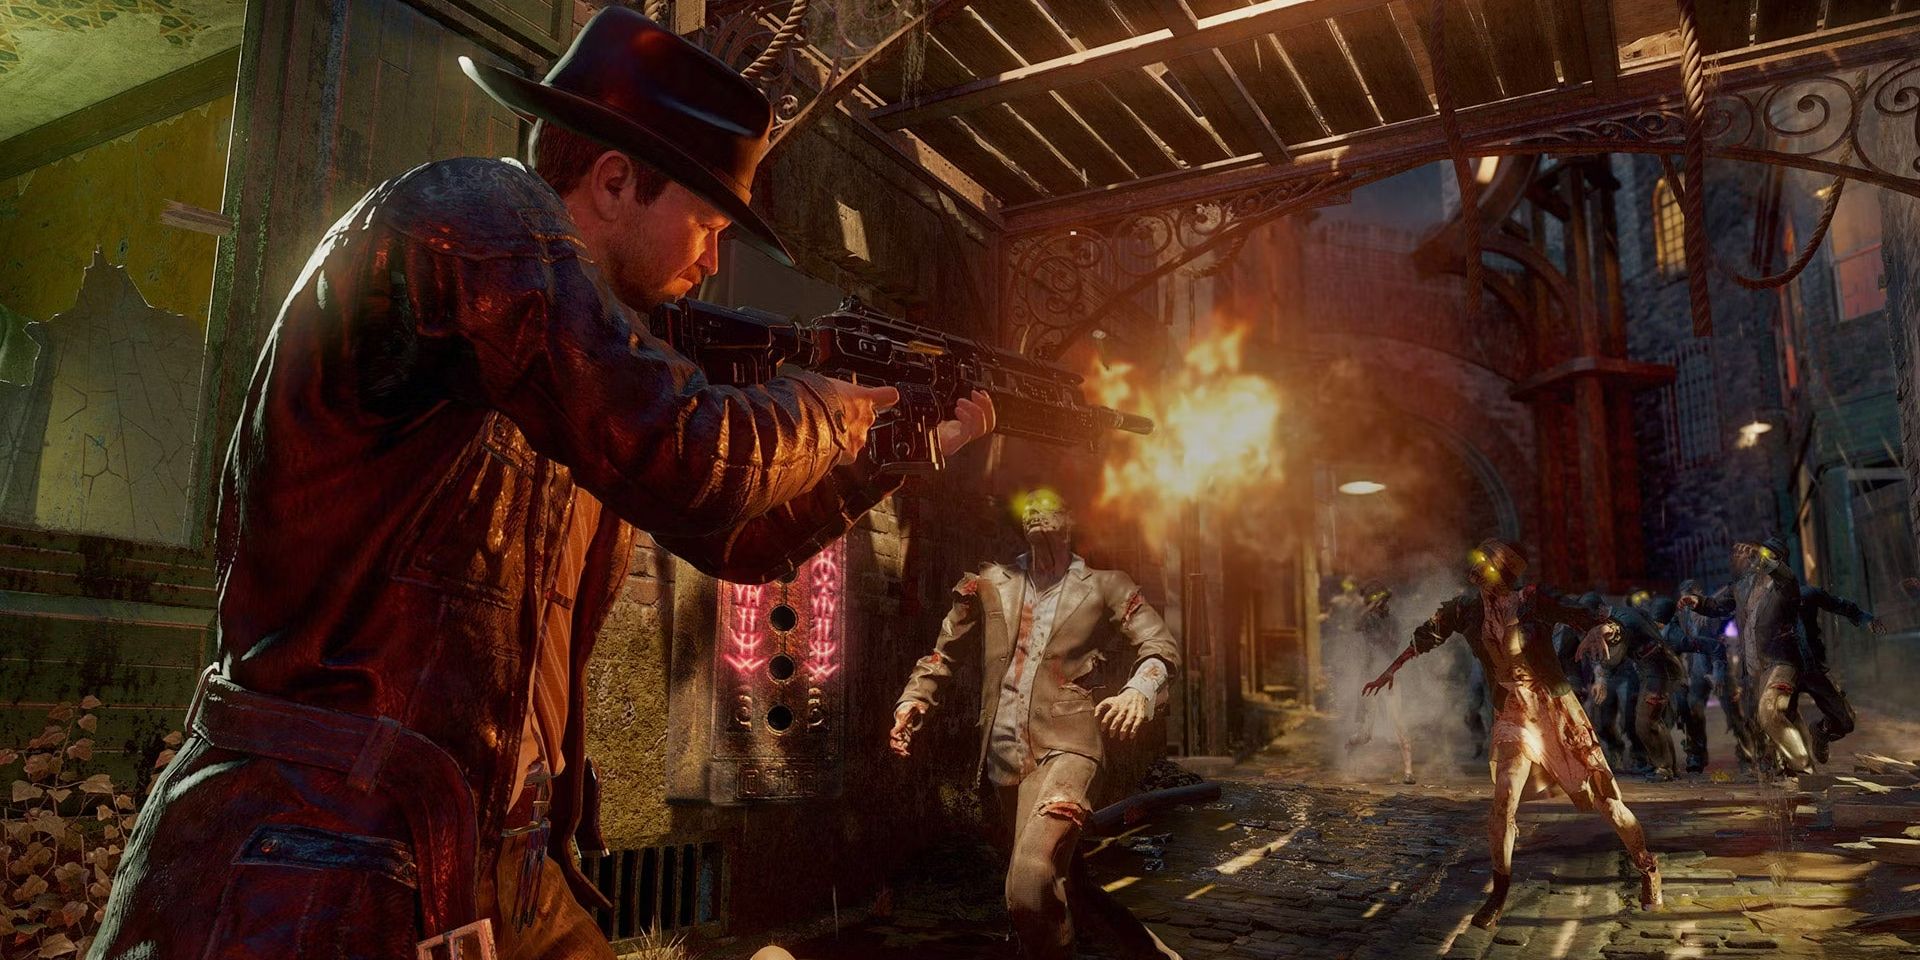 A fedora wearing player gunning down zombies from the video game Call of Duty Black Ops 3.